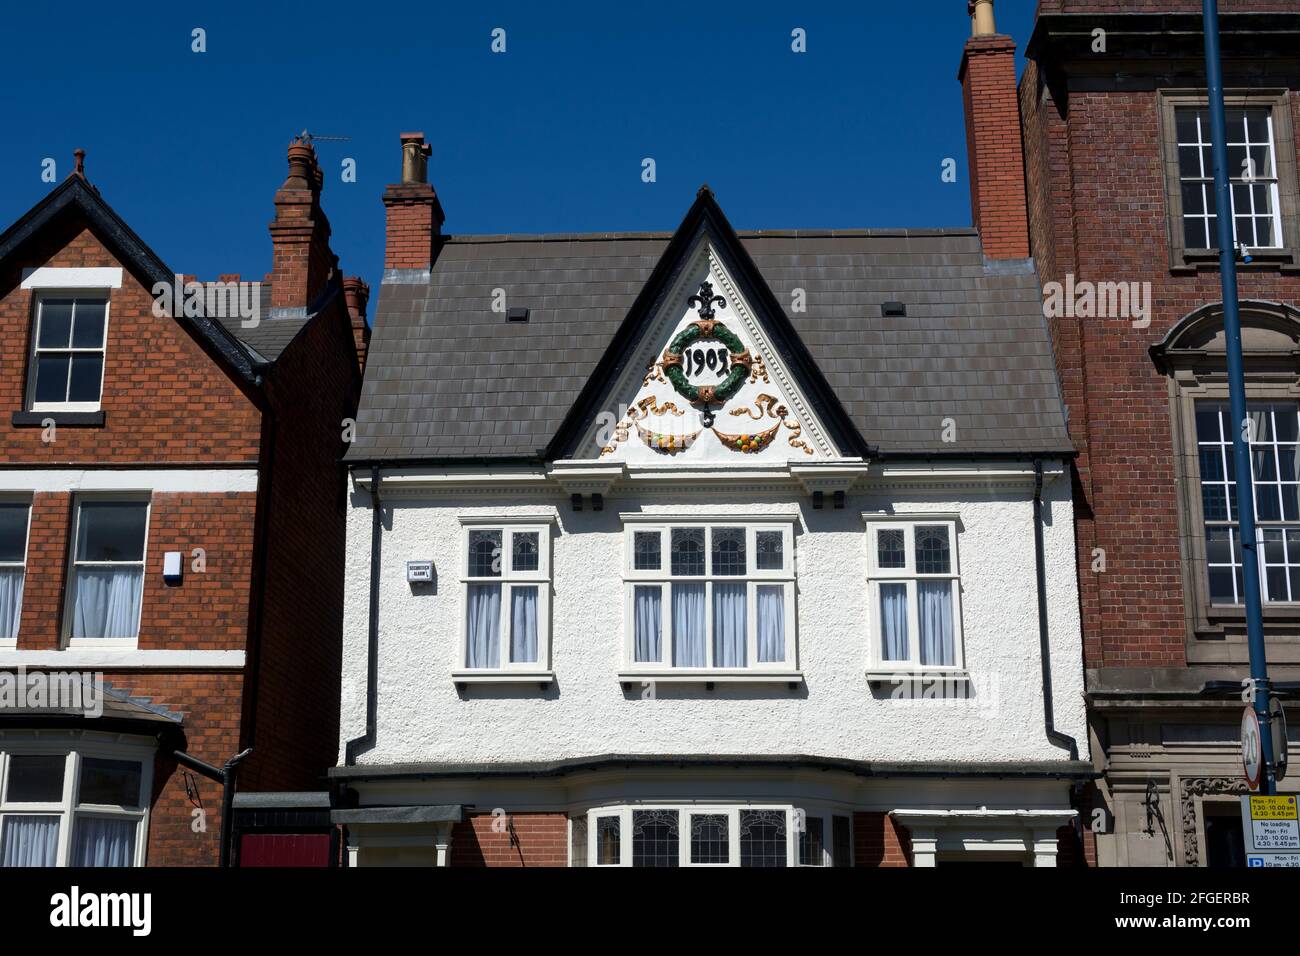 A house with 1903 date, Alcester Road, Moseley, Birmingham, England, UK Stock Photo